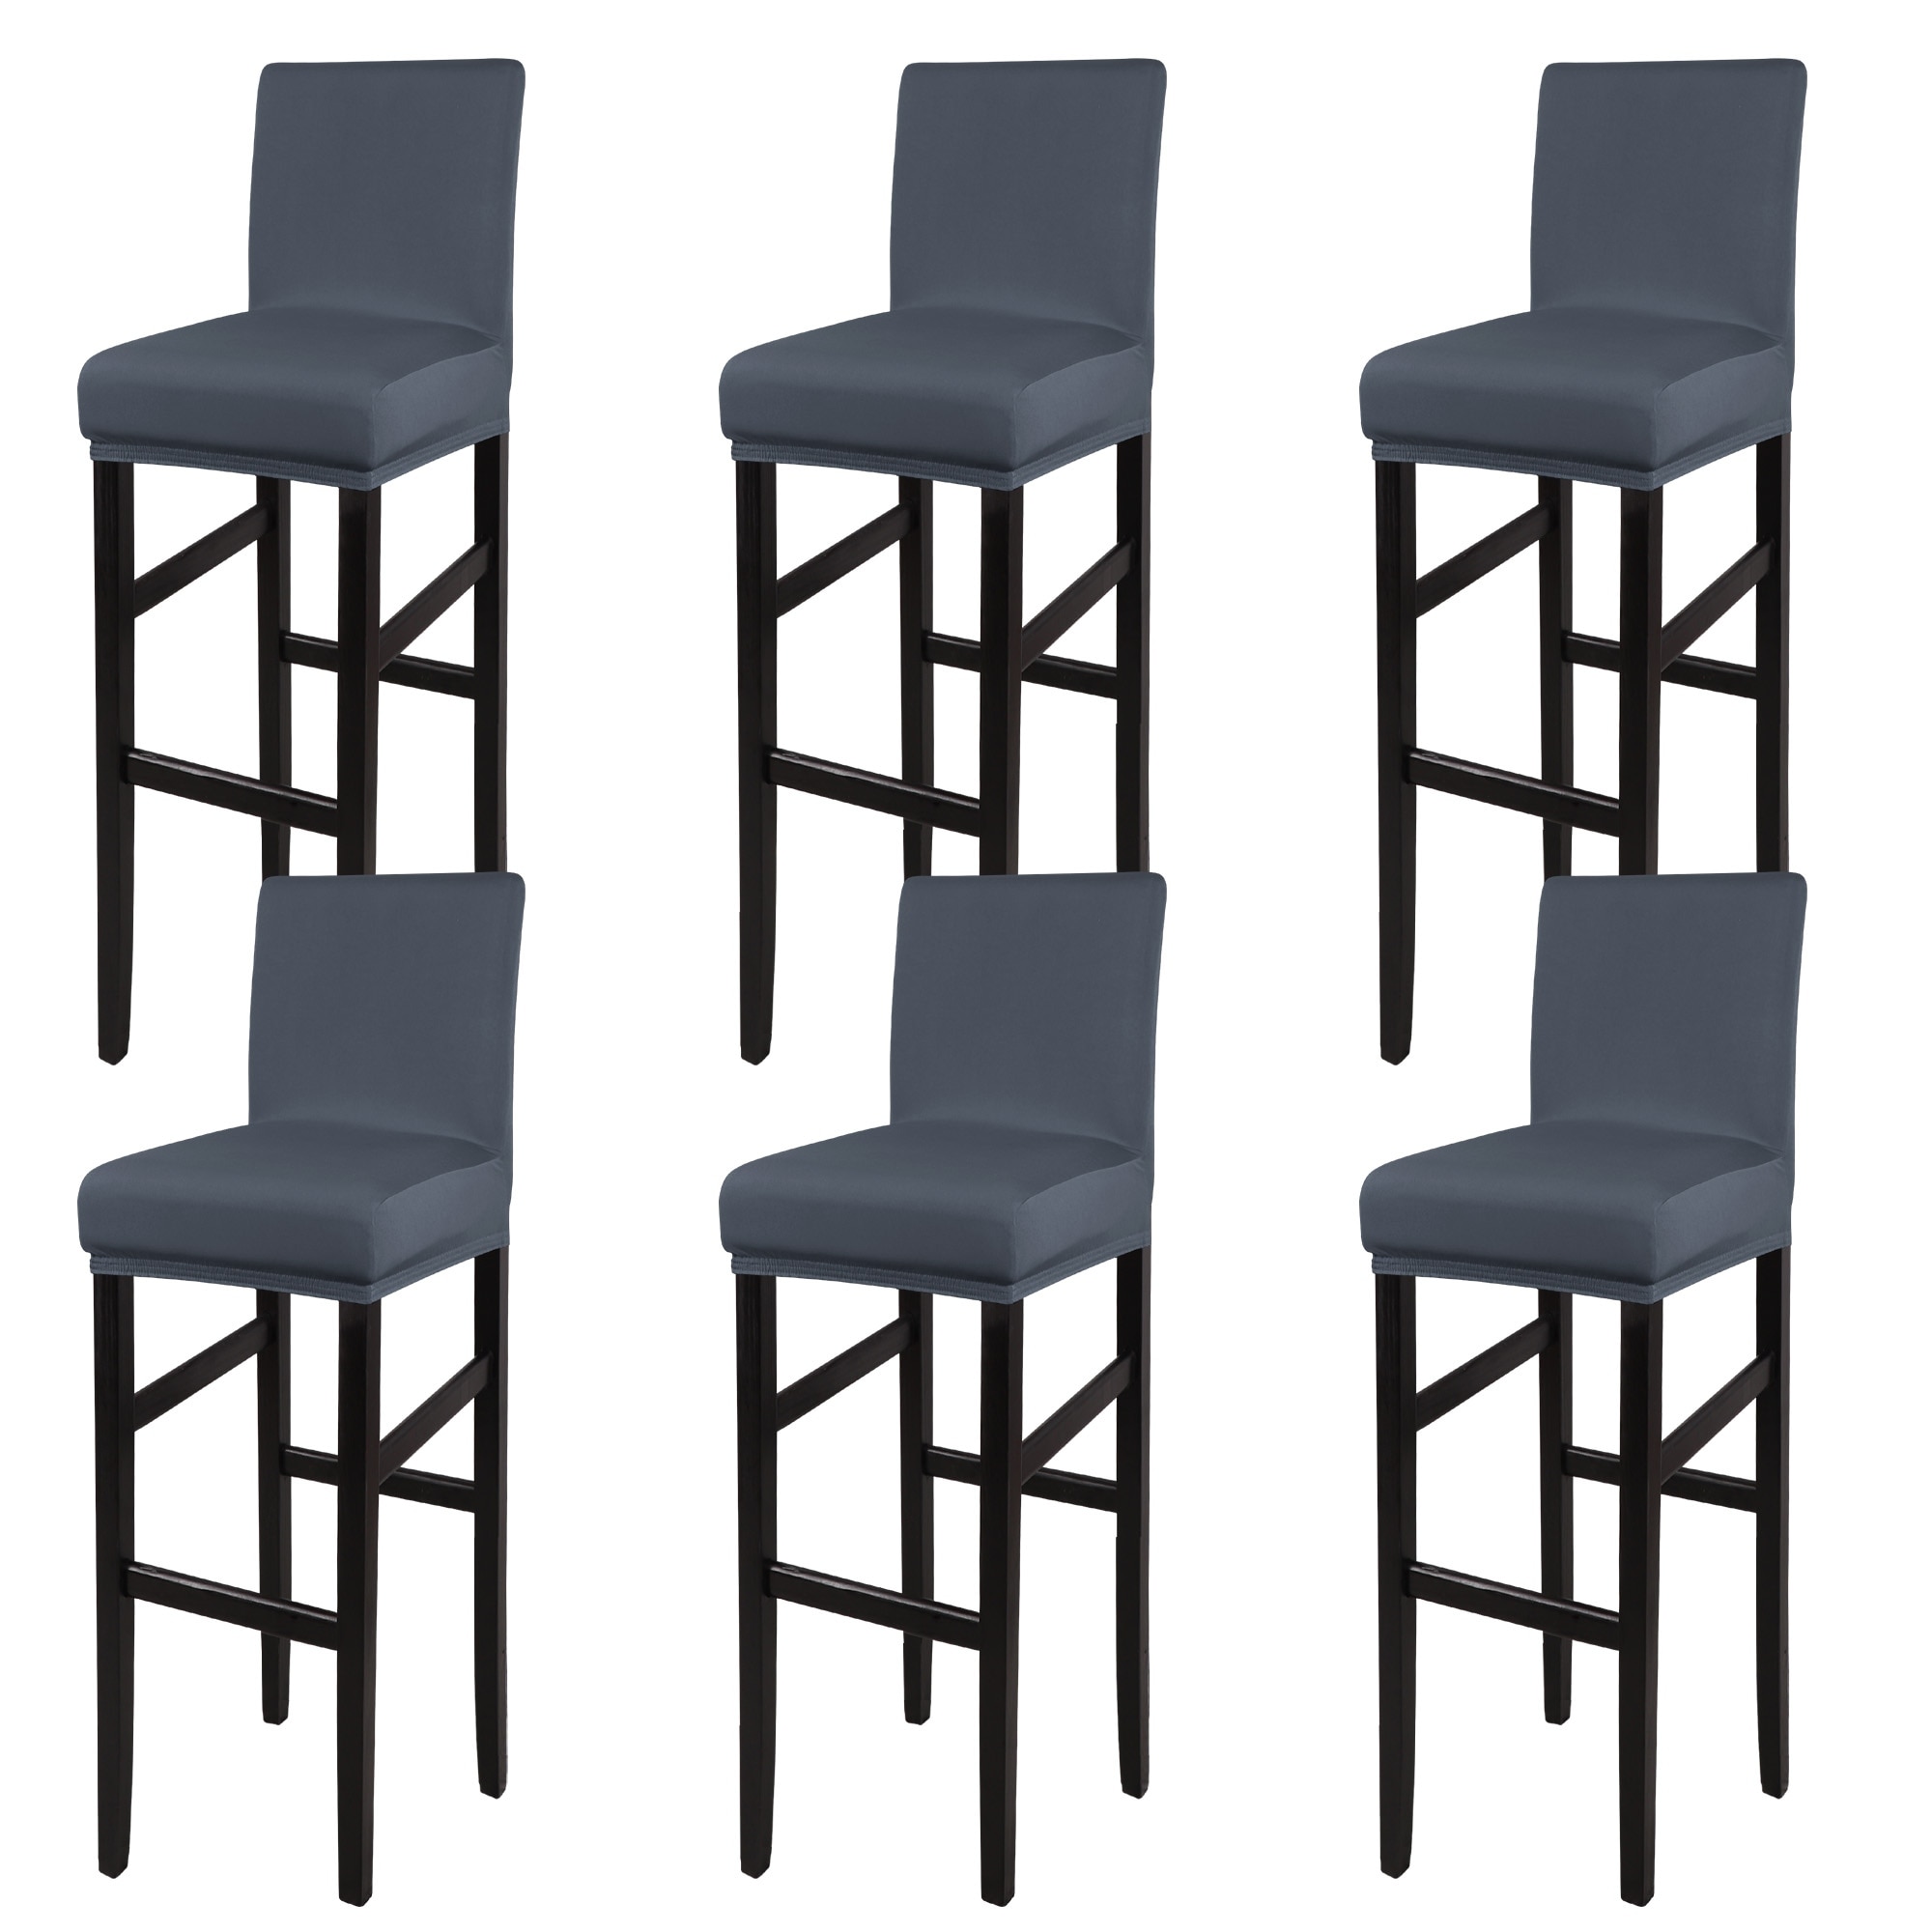 22 MOCAA Stretch Slipcover Chair Protectors for Short Back Chair Bar Stool Chair,ONLY Chair Covers